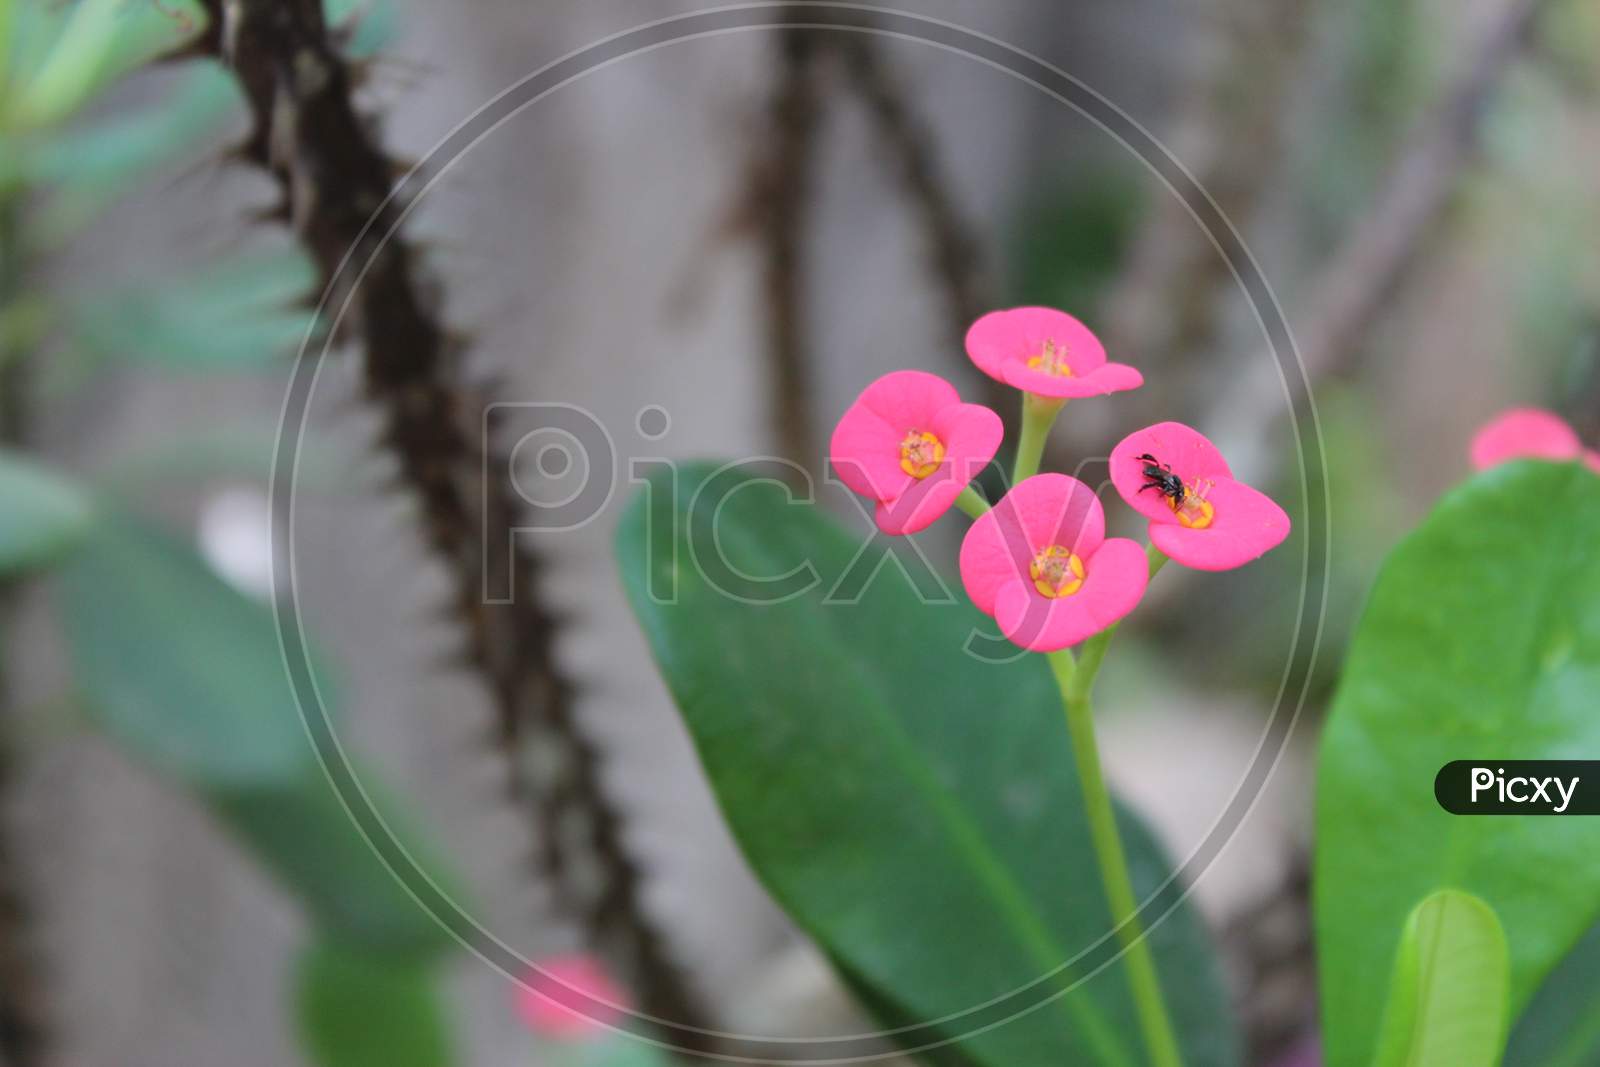 SMALL PINK FLOWERS WITH GREEN LEAF